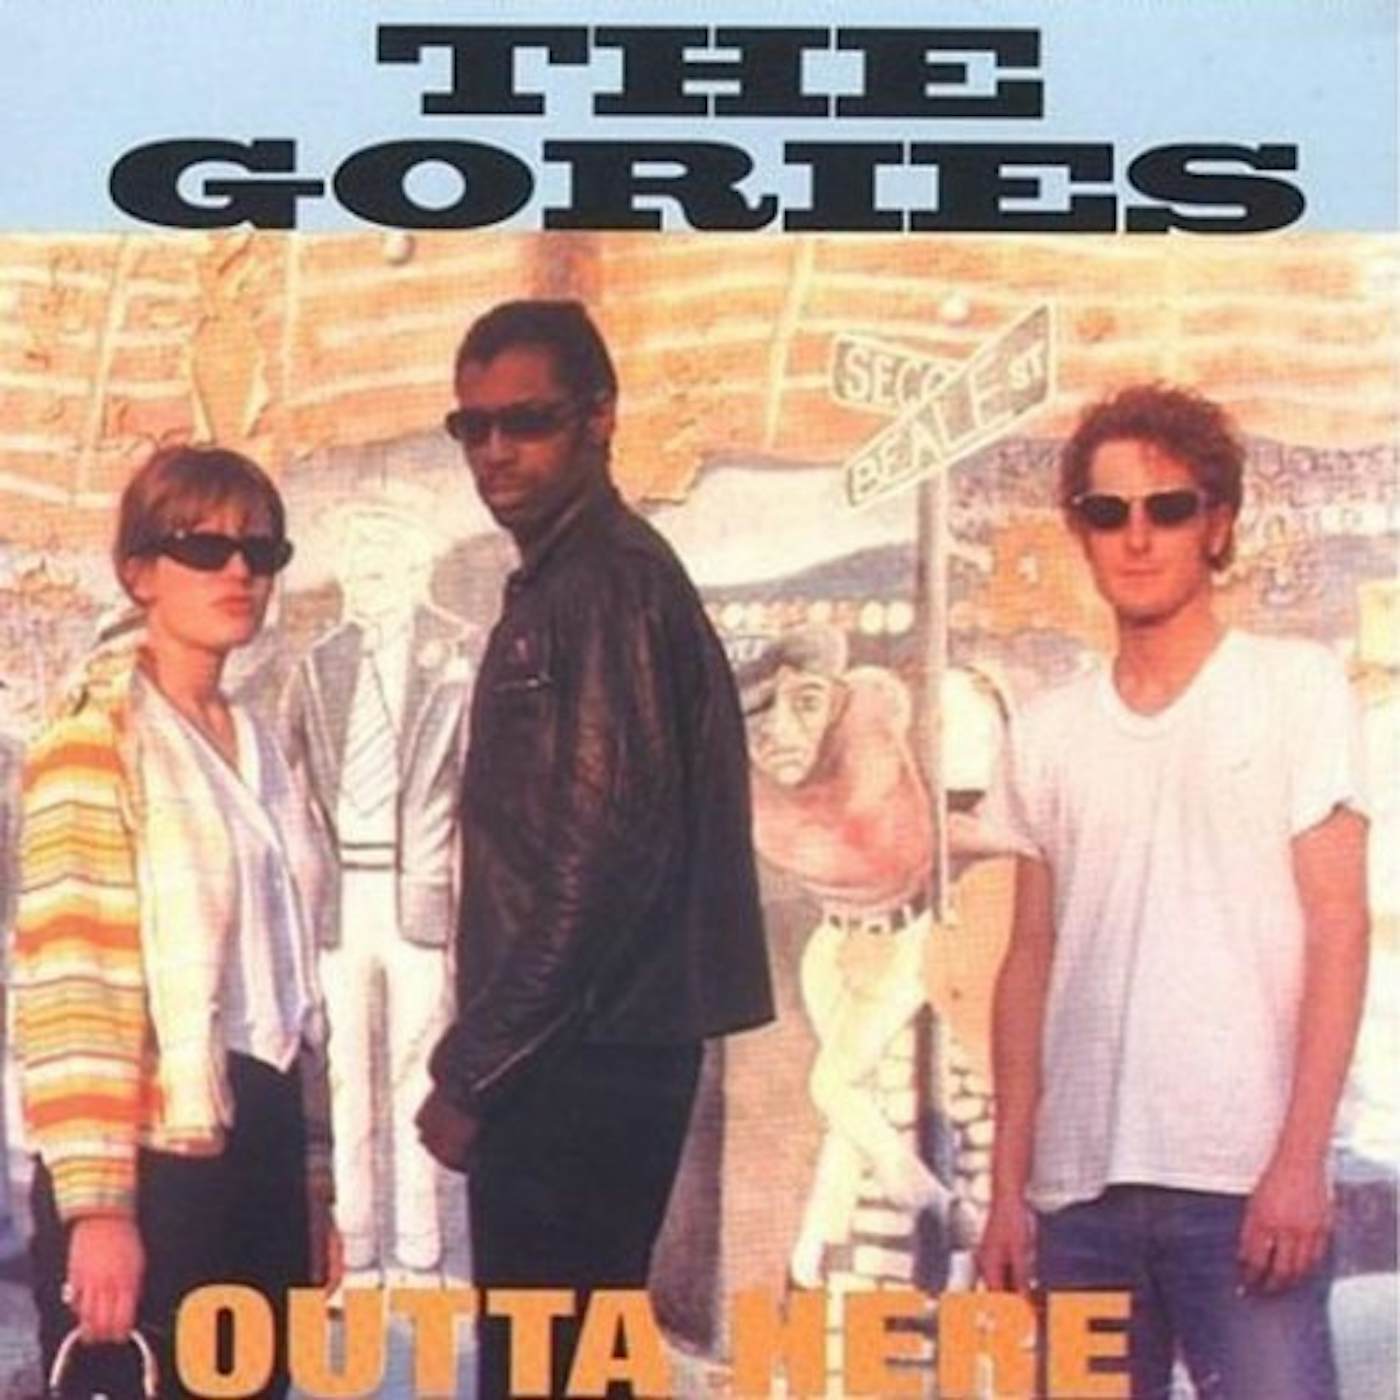 The Gories Outta Here Vinyl Record